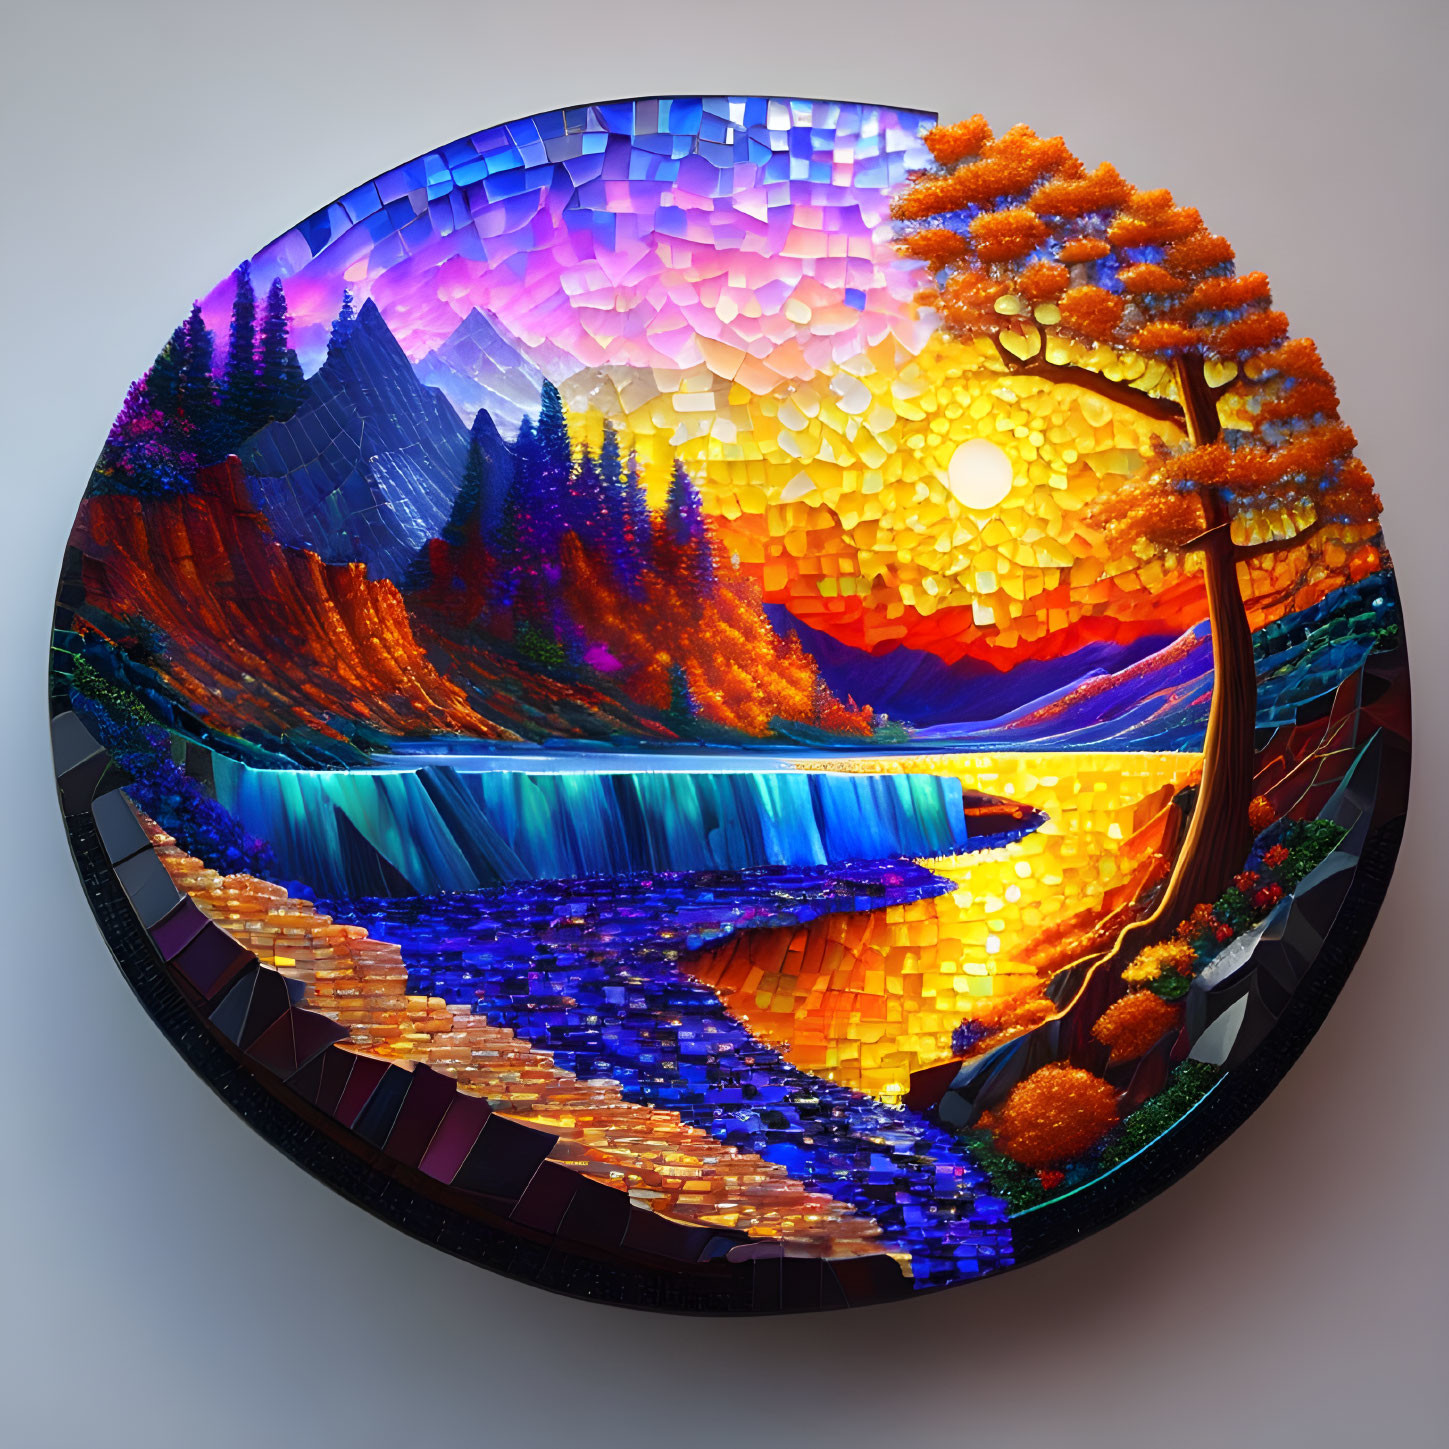 Circular mosaic of vivid autumn landscape with trees, waterfall, river, and sunset sky